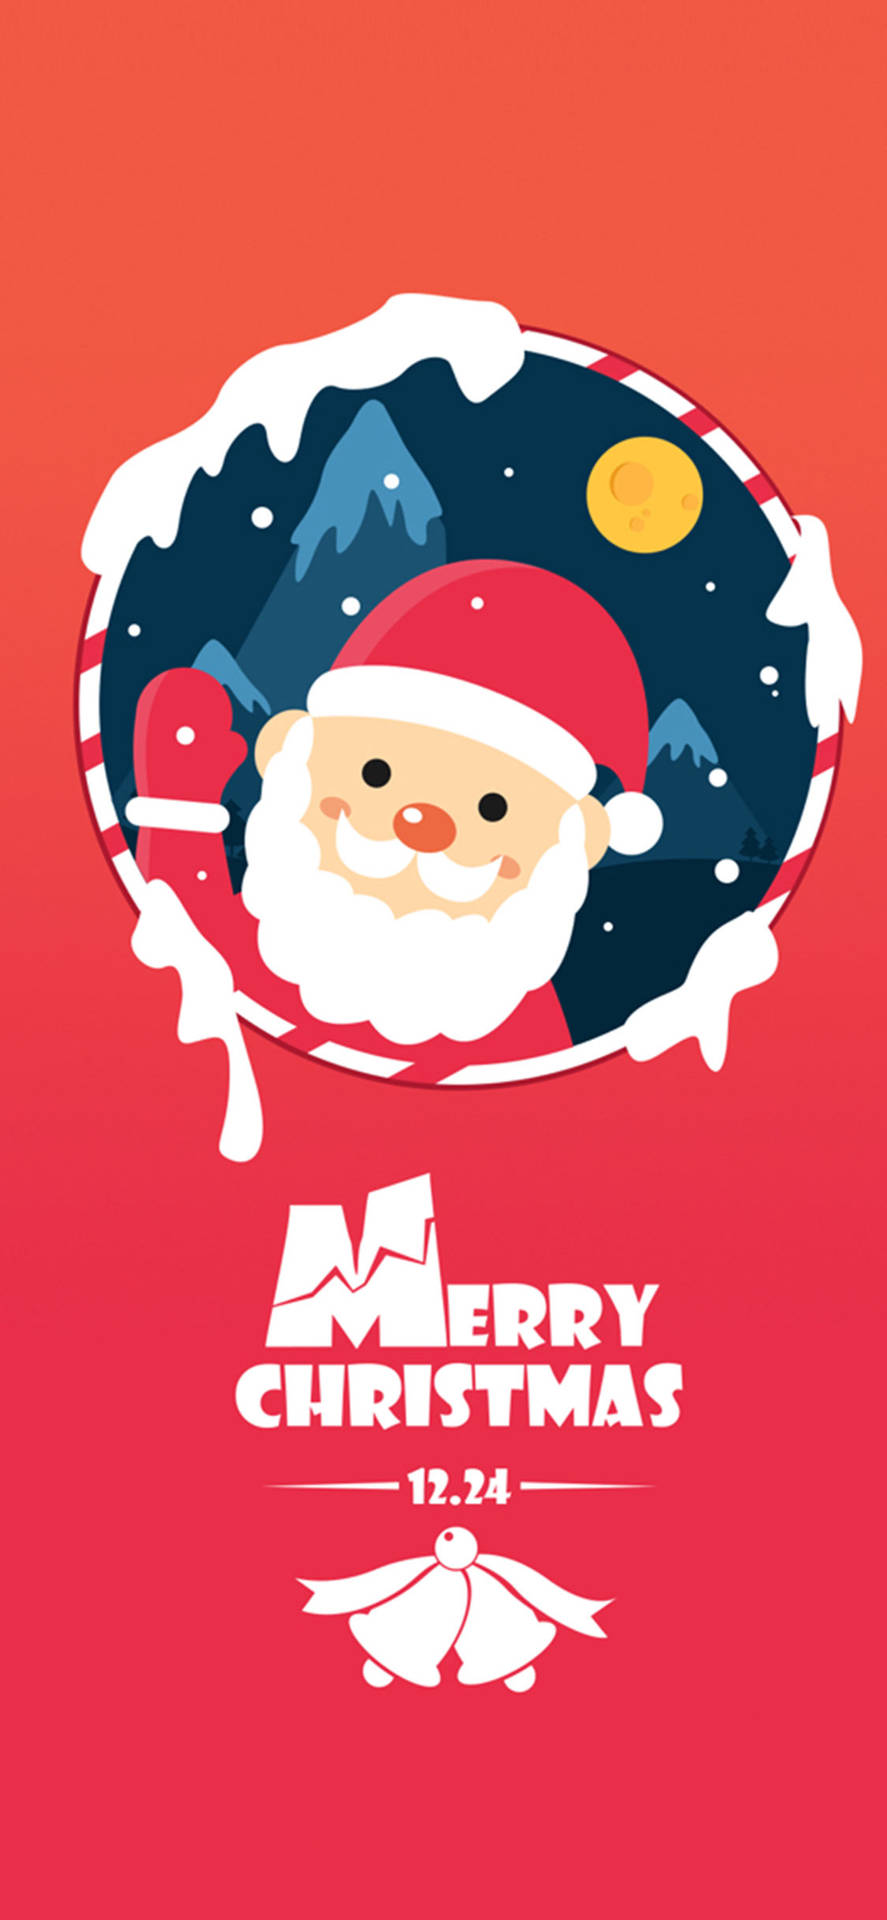 Merry Christmas Greeting IPhone Wallpaper